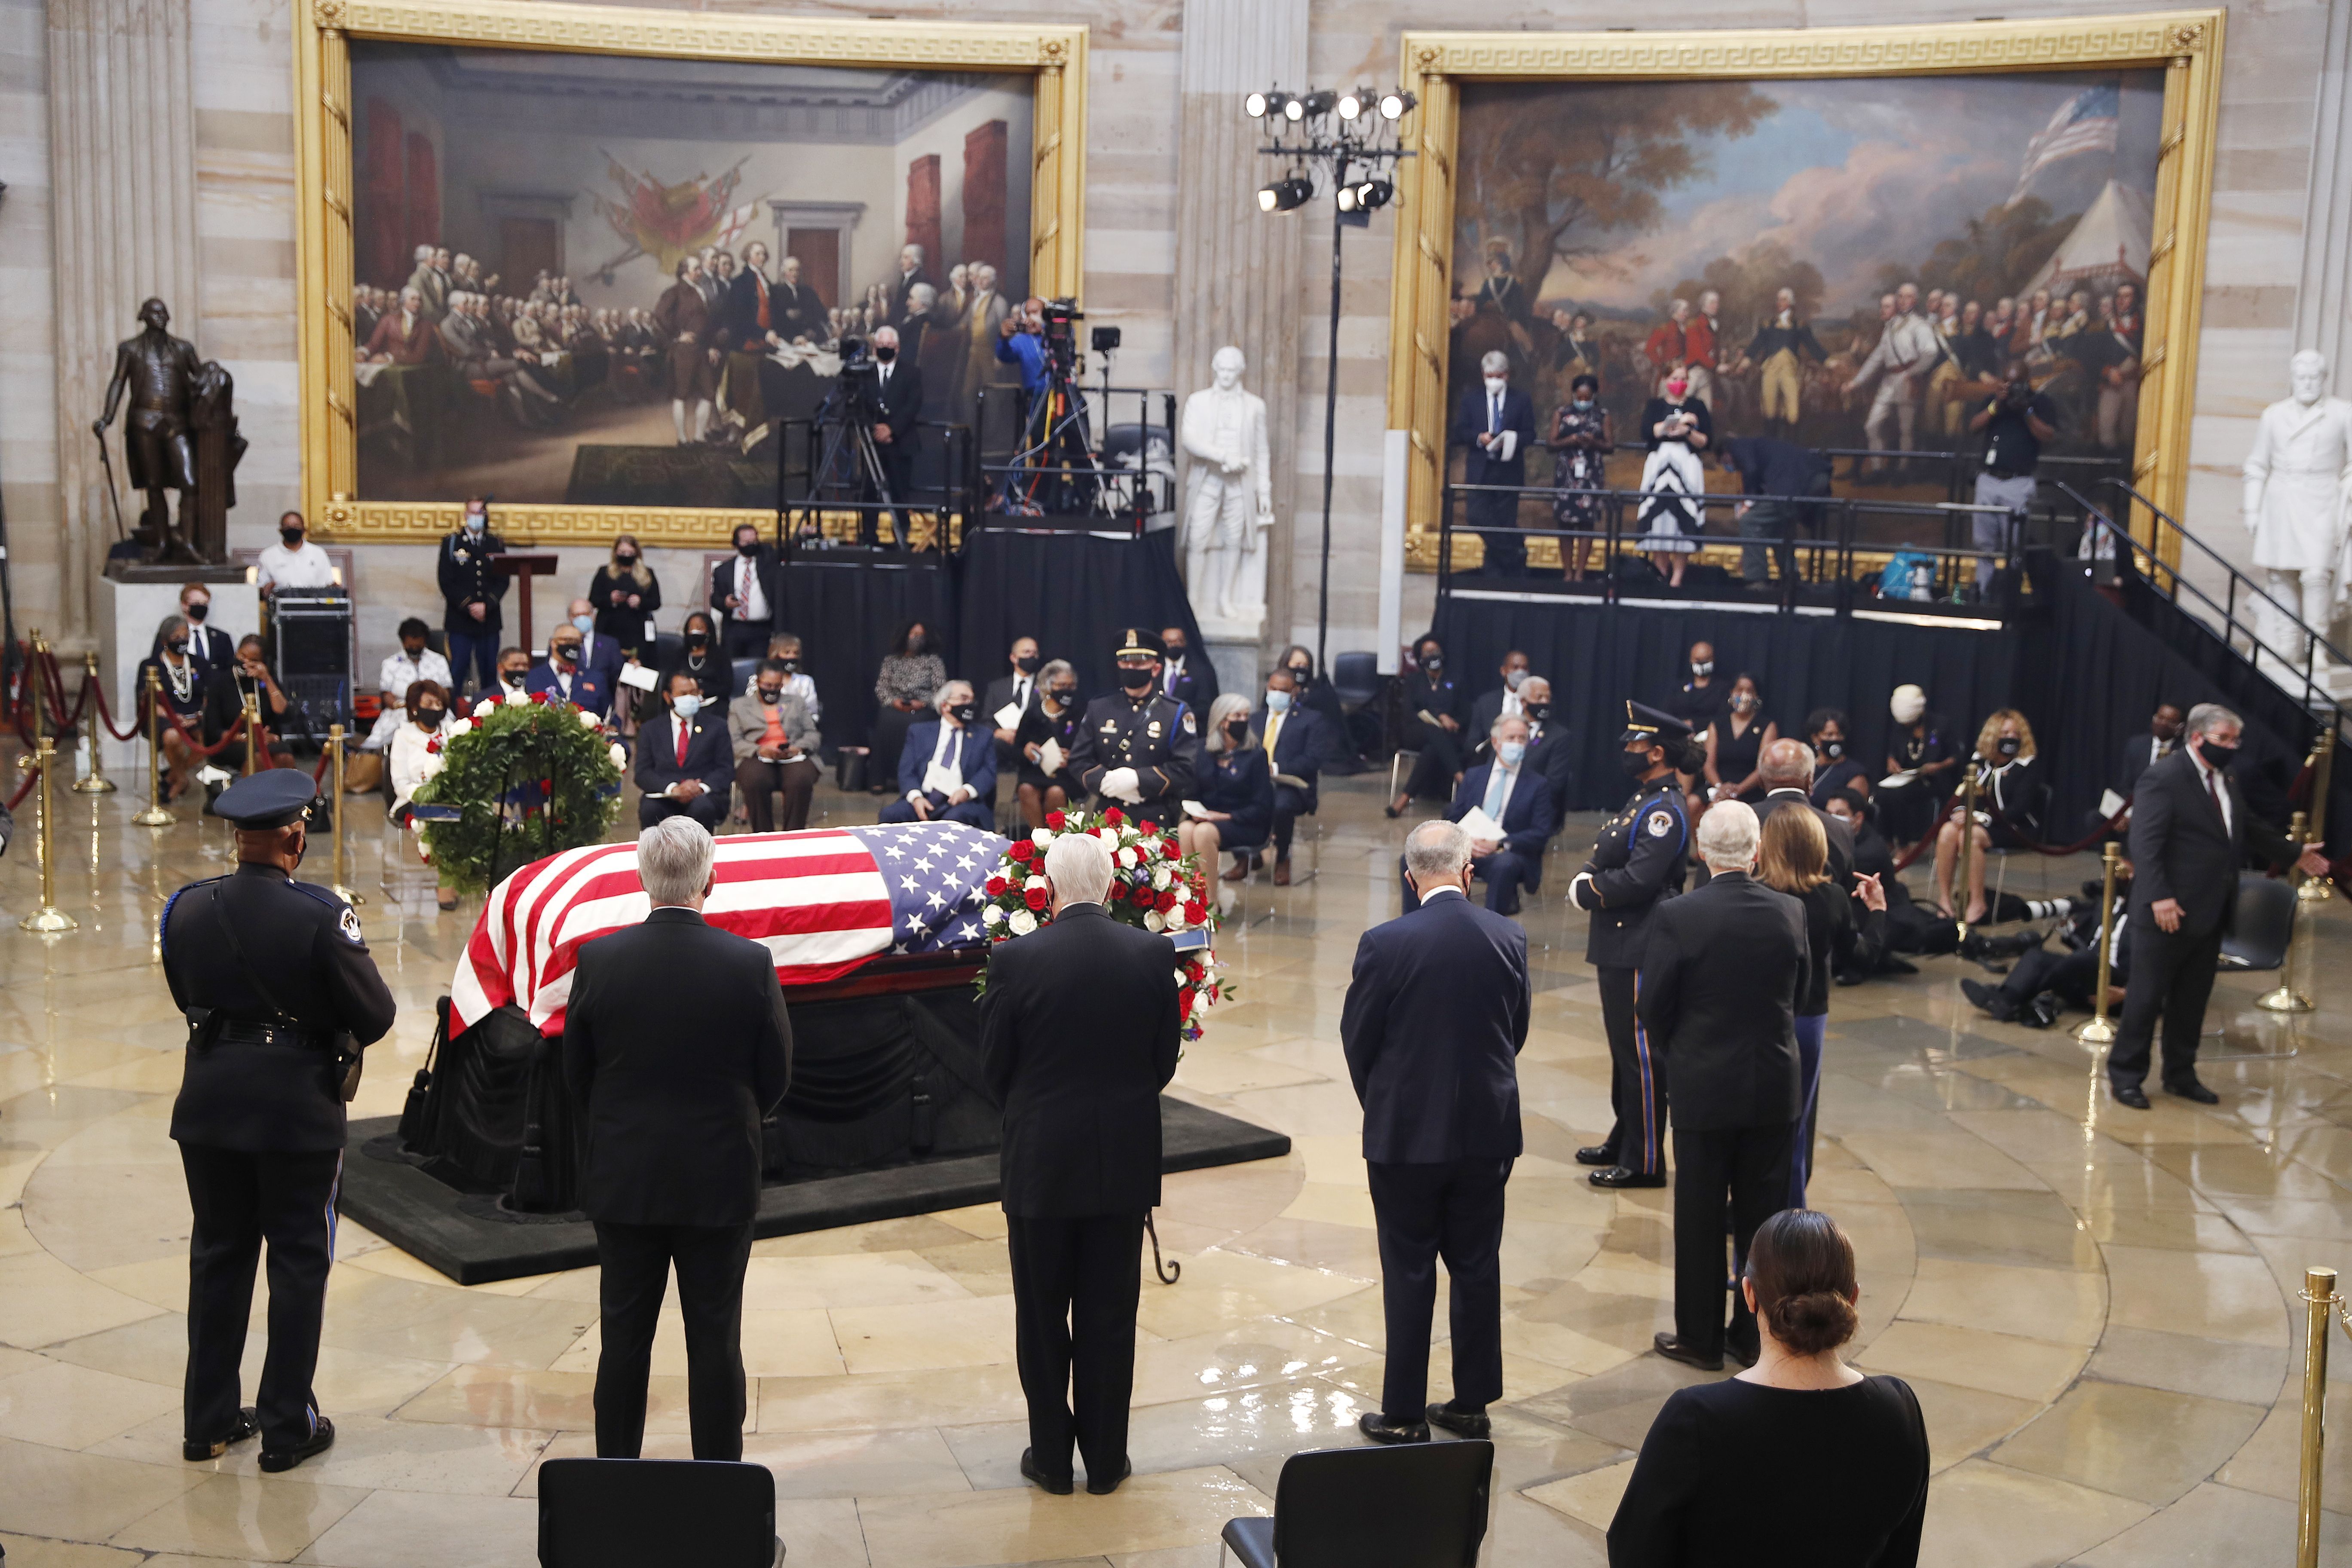 30 Photos from John Lewis's Funeral at the United States Capitol